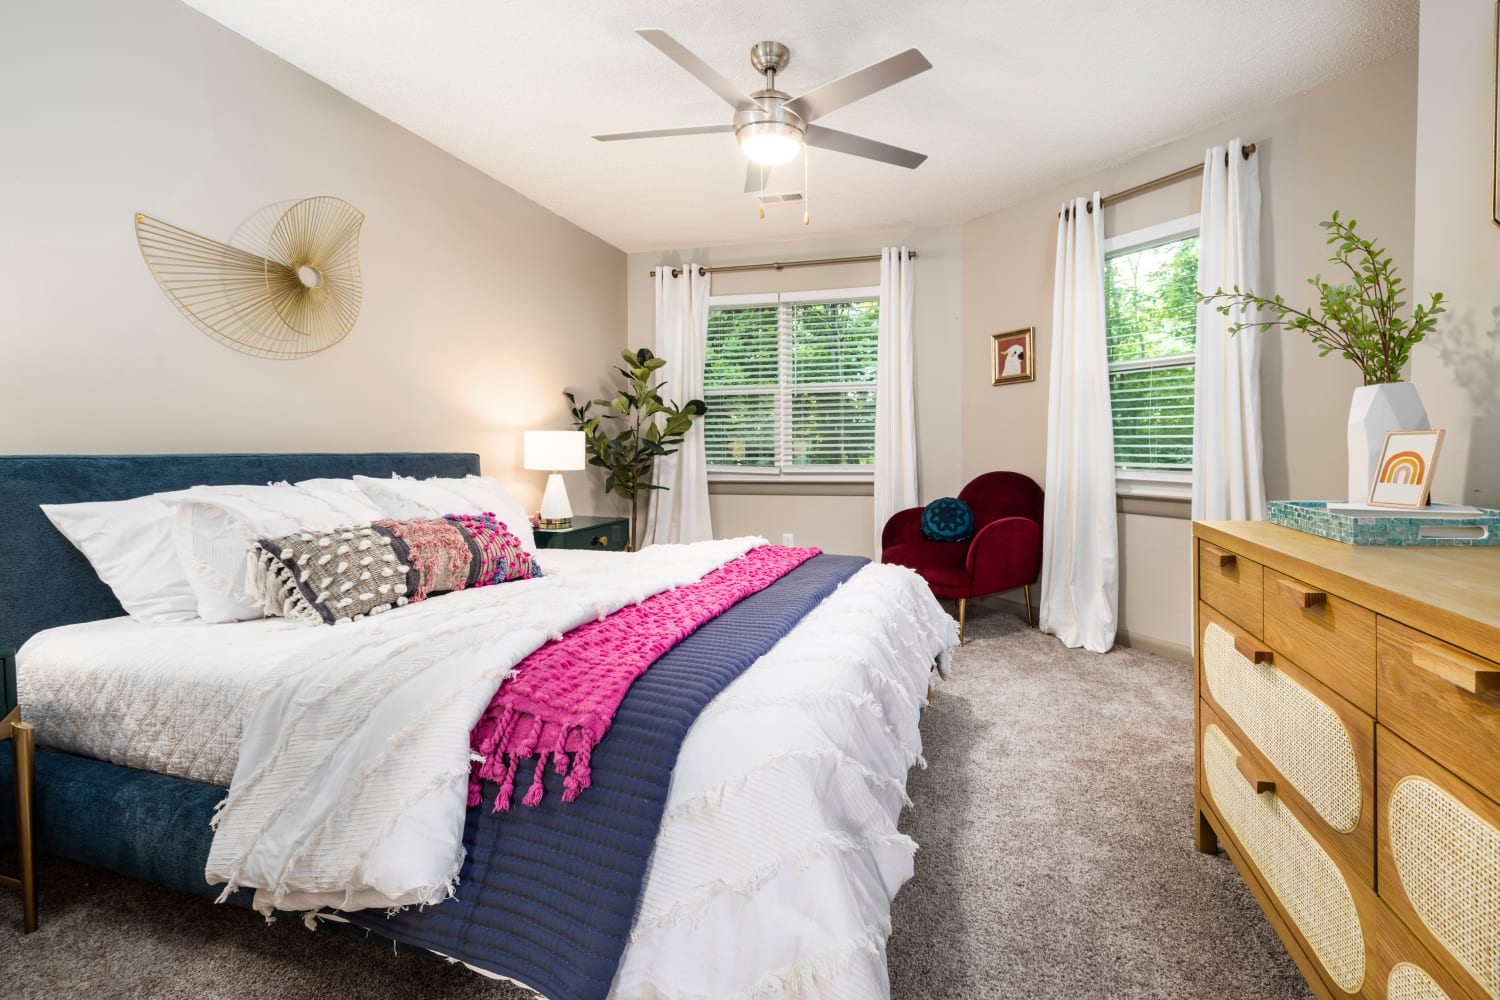 A model home's bedroom at Trinity at the Hill in Carrboro, North Carolina